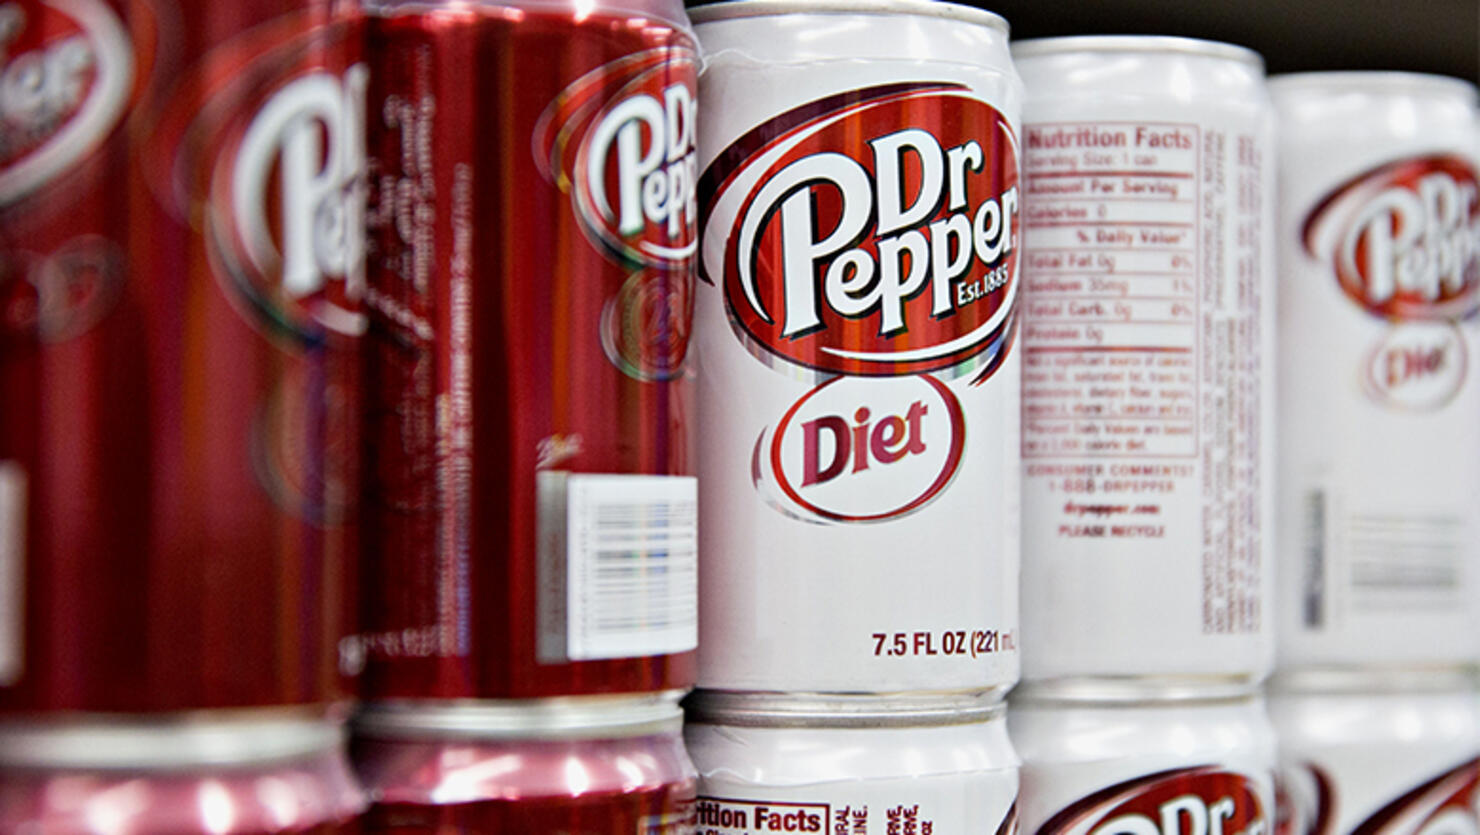 Dr Pepper Snapple Group Inc. Products As Keurig Green Mountain Inc. Moves To Take Control In $18.7 Billion Drink Deal